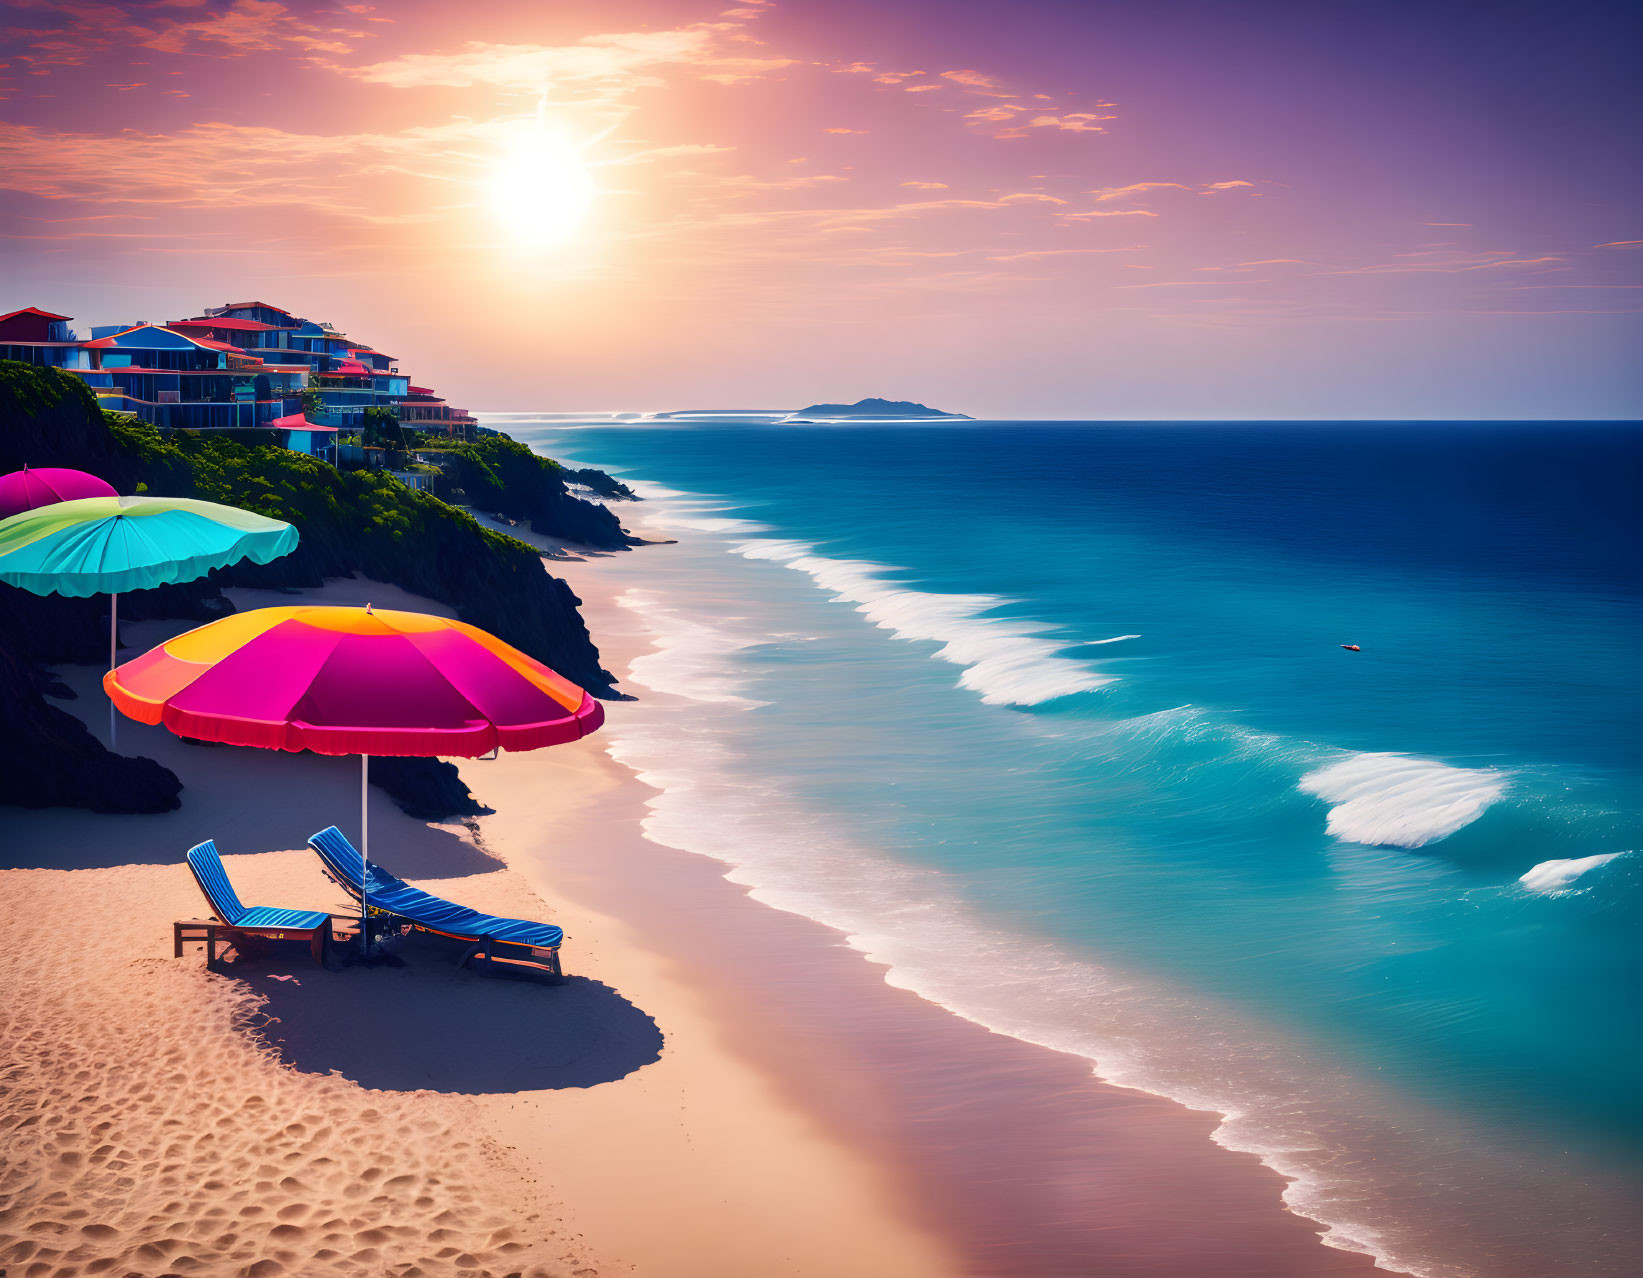 Vibrant sunset beach scene with colorful umbrellas, lounge chair, ocean waves, and cliff-side